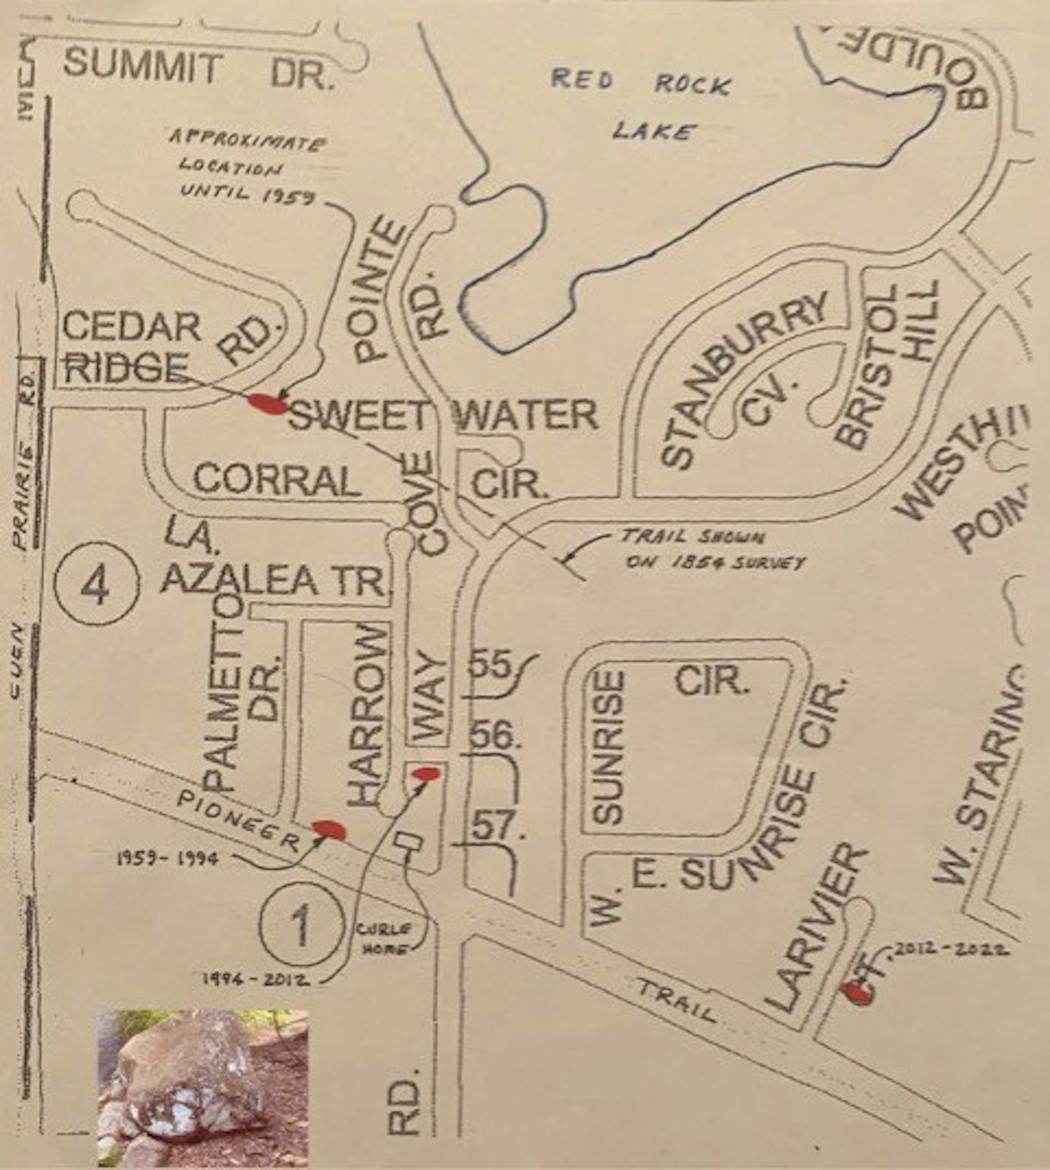 A map of the south Eden Prairie neighborhood where the Red Rock was located, going back to the 1850s.